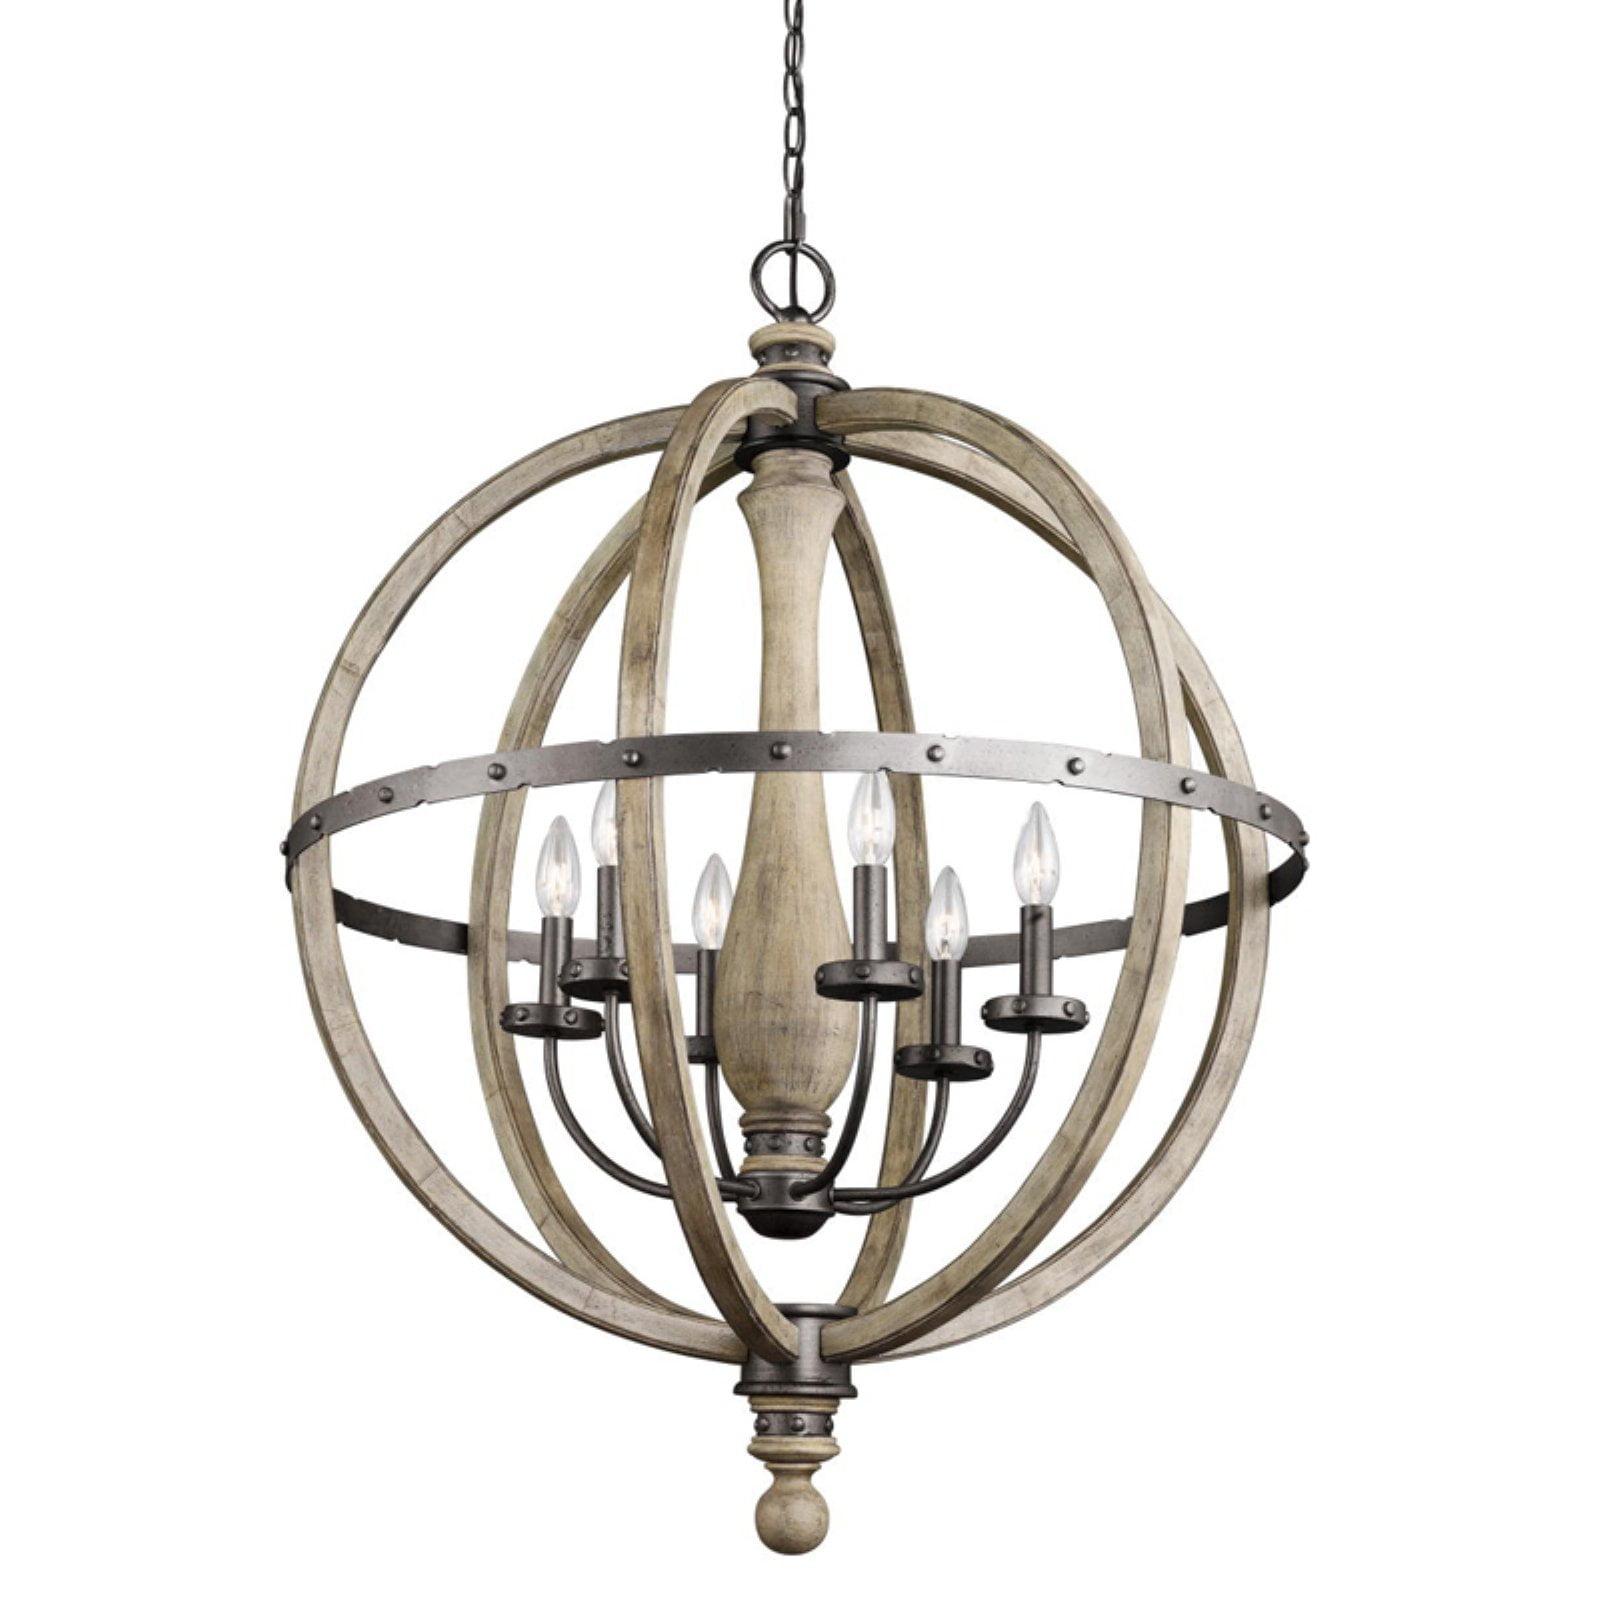 Rustic Country Grey Steel Cage Chandelier with 6 Candle-like Bulbs